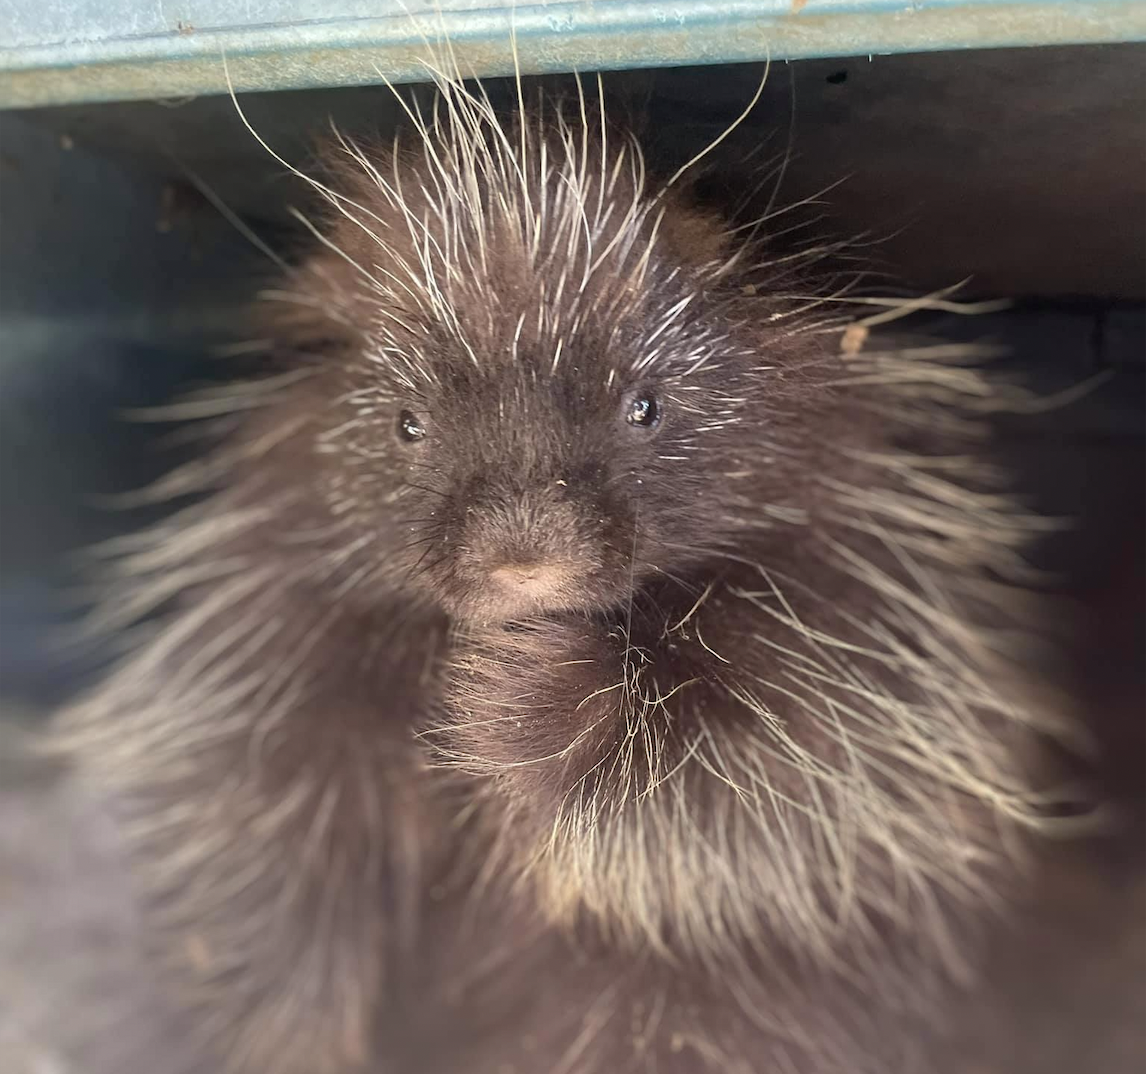 A porcupine looks at the camera. (photo © Winchester Wildlife Rescue & Rehabilitation)